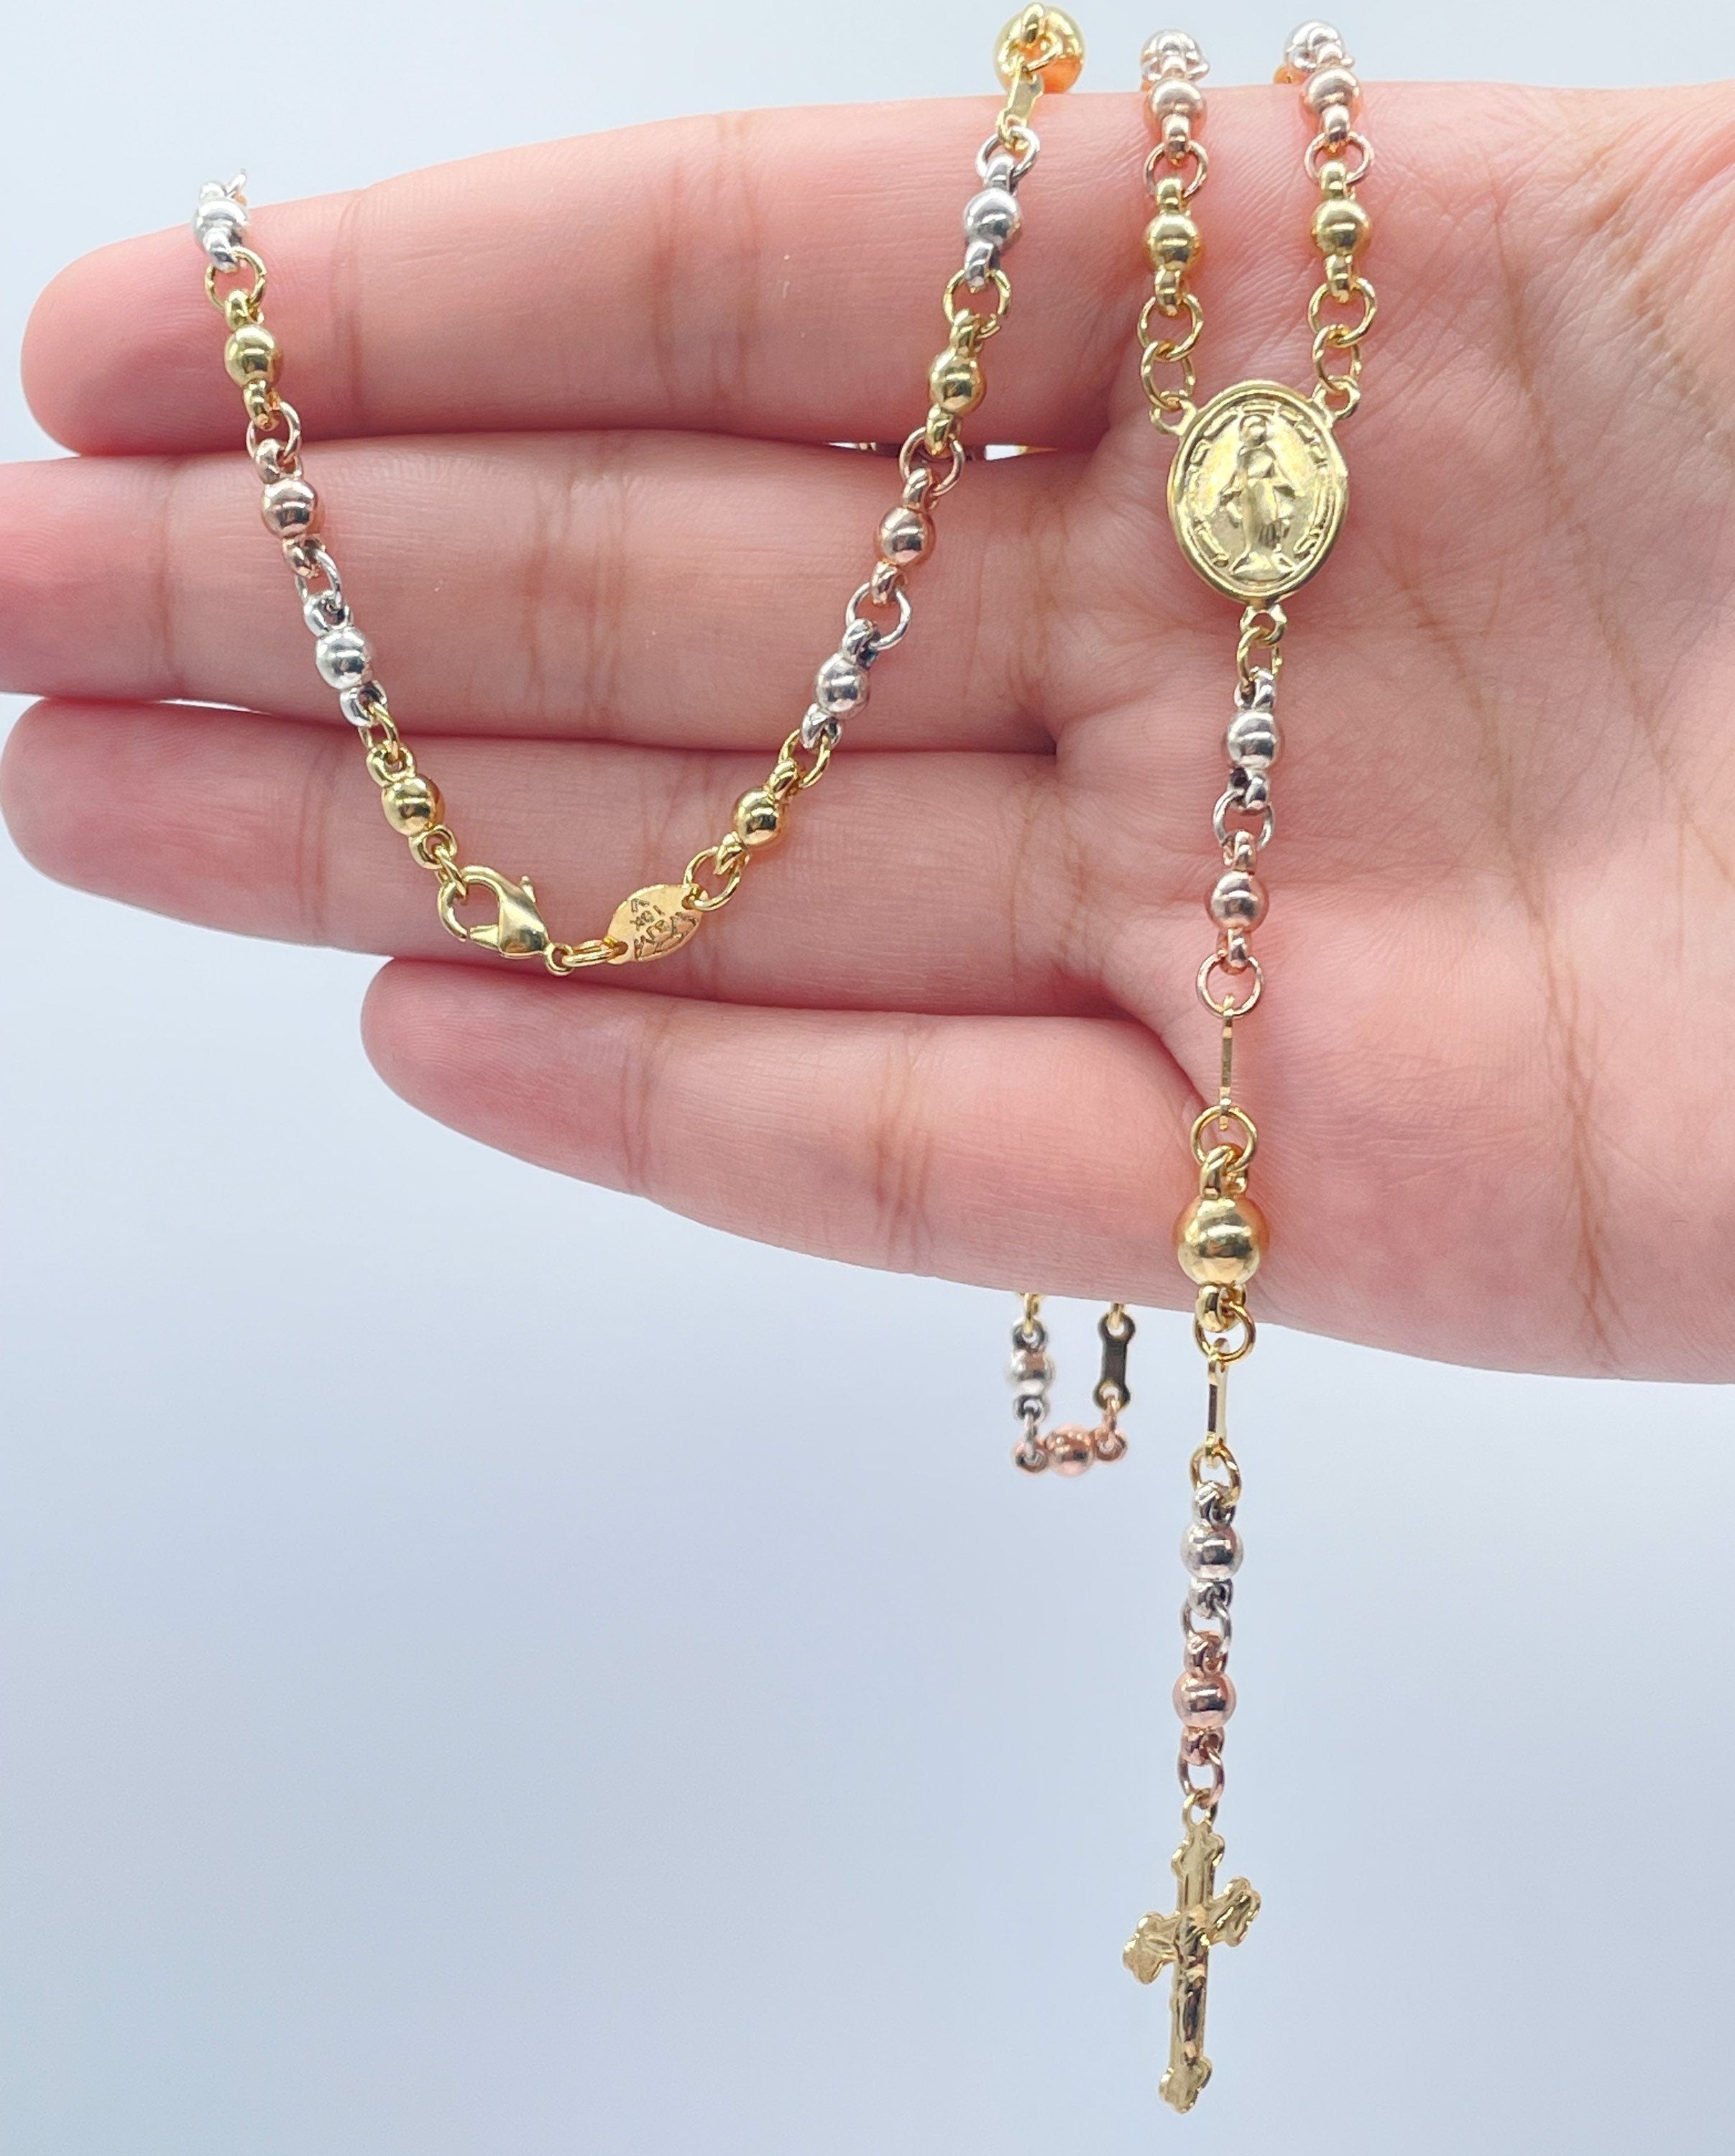 14K Yellow, White, or Tri-Color Gold 2.5mm Rosary Necklace 18 Inches |  Sarraf.com